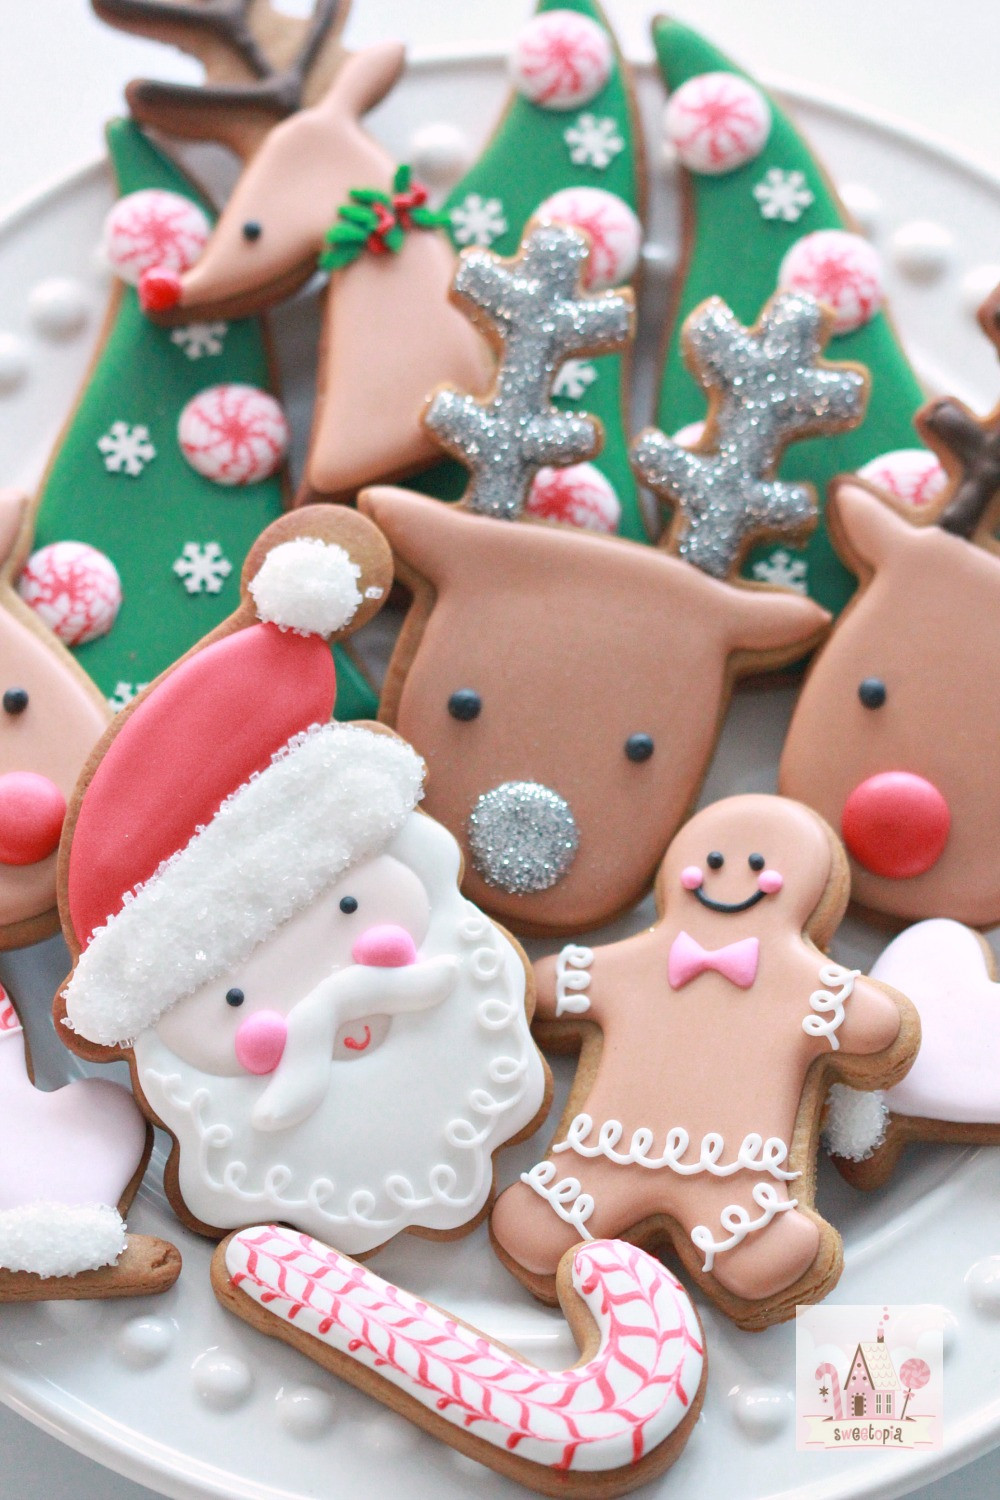 Christmas Cookies Royal Icing
 Video How to Decorate Christmas Cookies Simple Designs